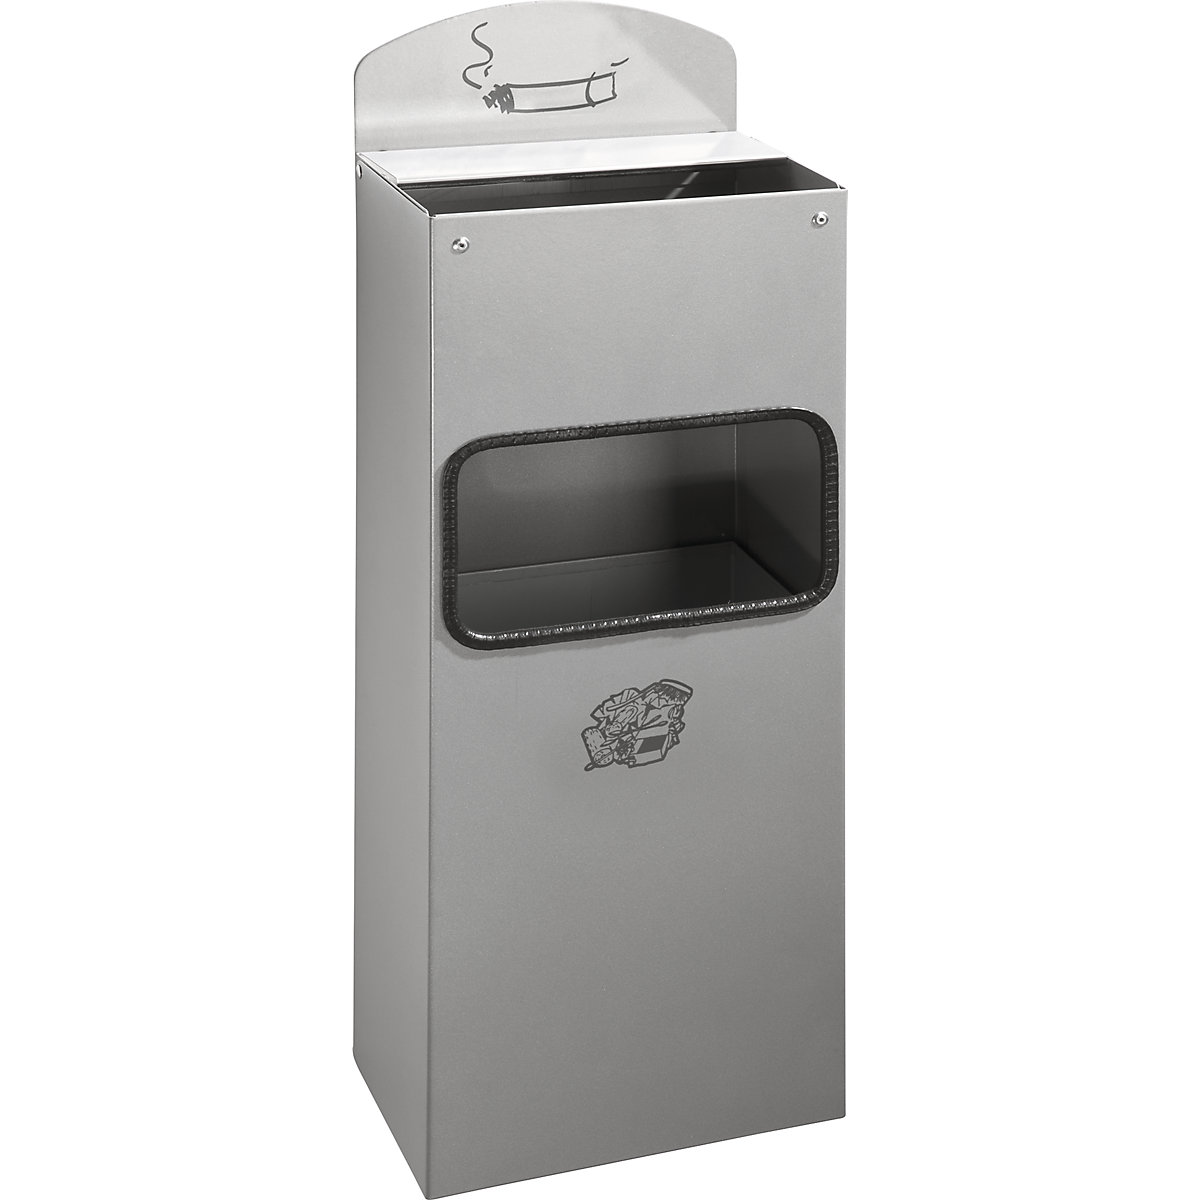 Combination wall ashtray with waste disposal – VAR